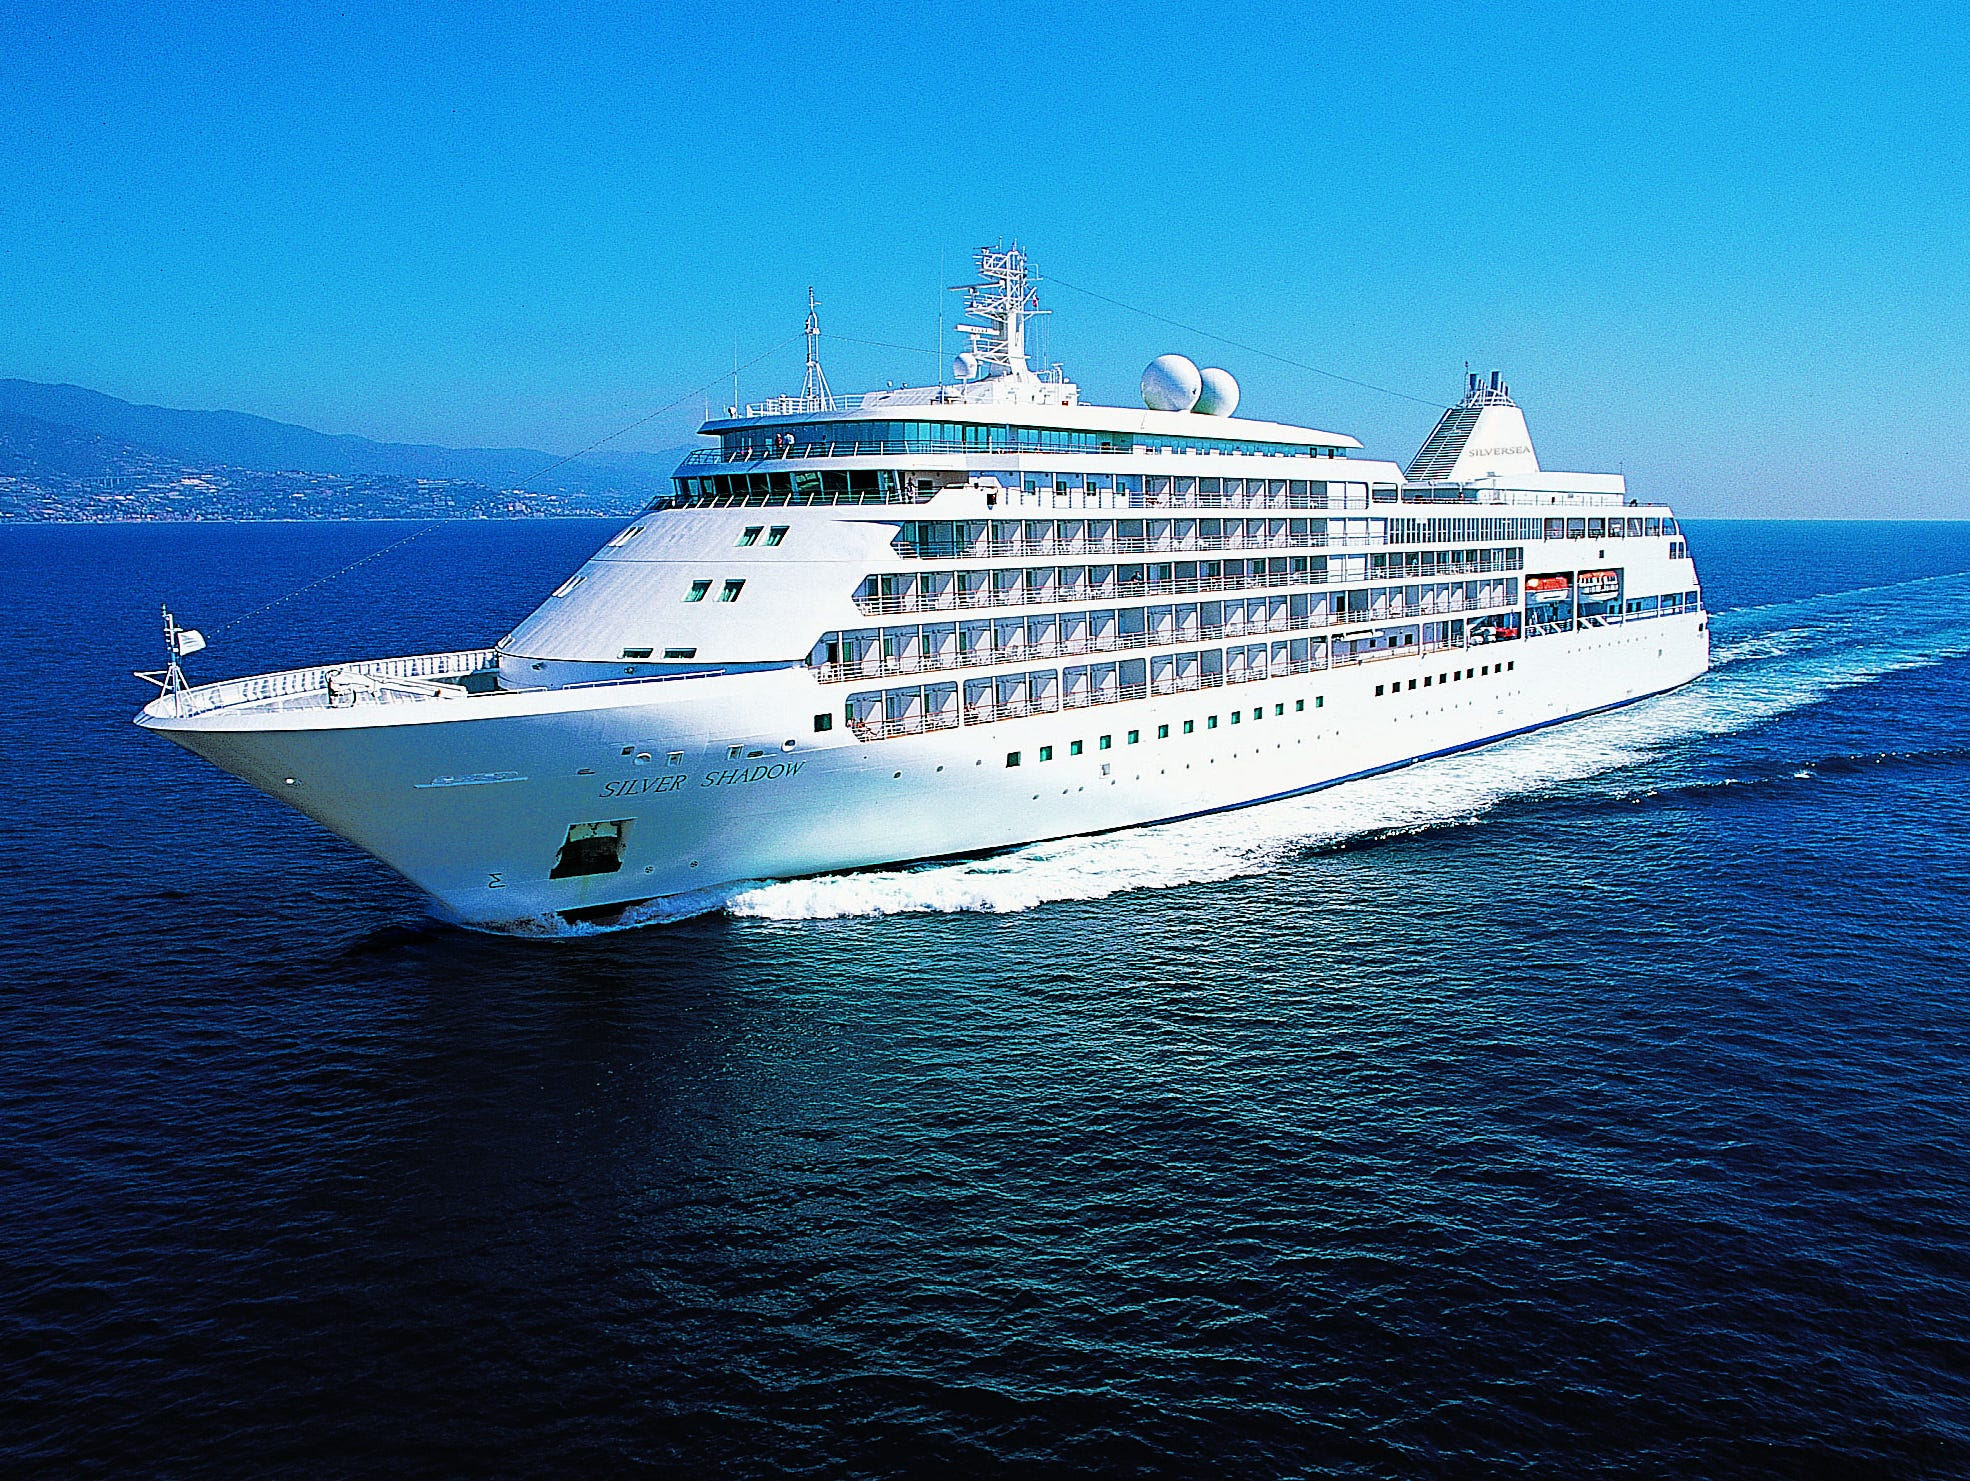 Explore the Caribbean while experiencing Silversea's elegant, European-style ambience and gracious service on the 382-passenger Shadow or 296-passenger Cloud.